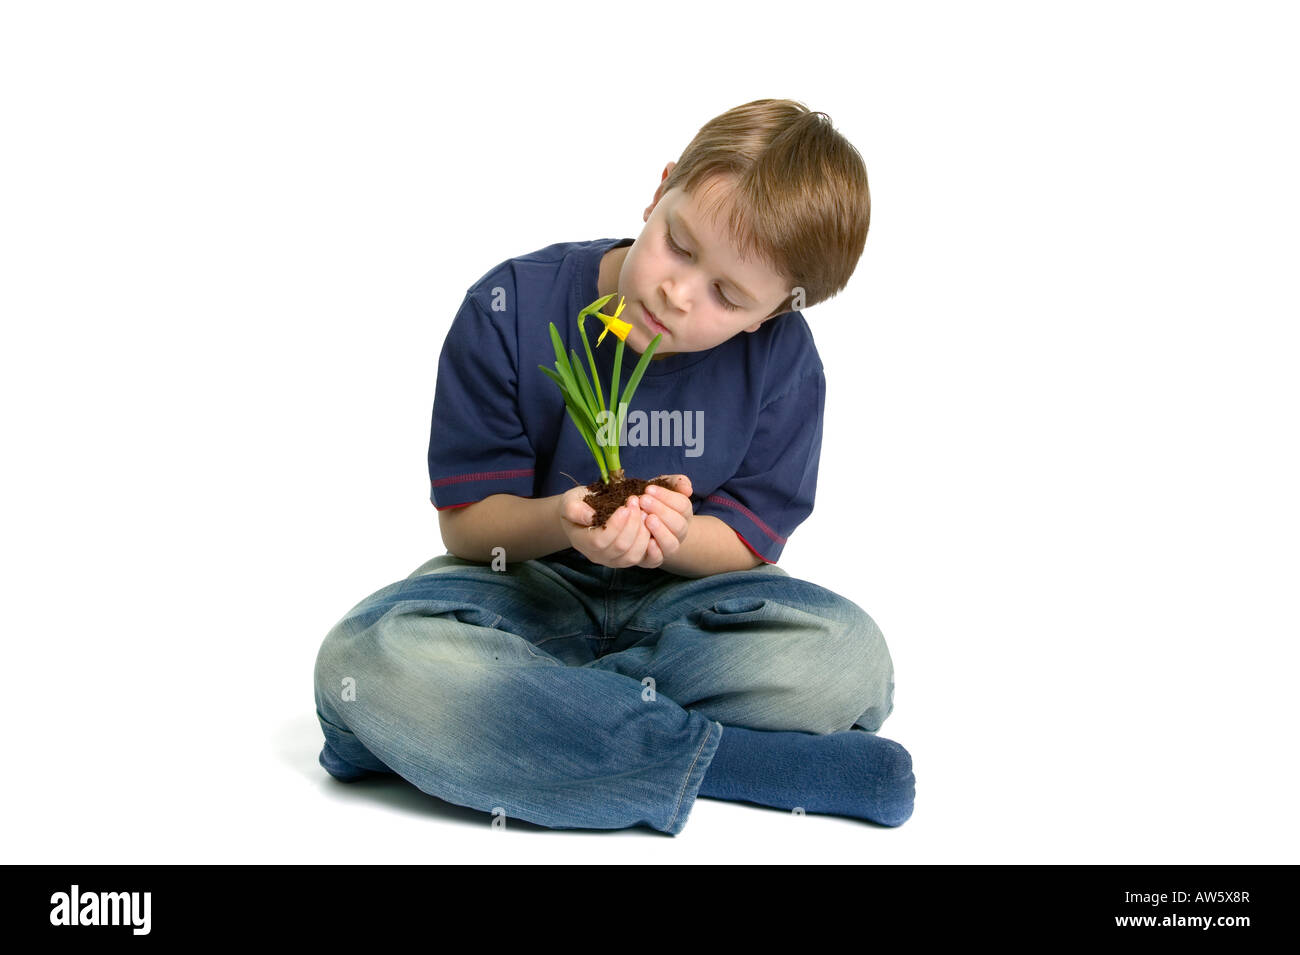 A young boy sat crossed legs looking at a daffodil he s holding in his hands shot against a white background Stock Photo